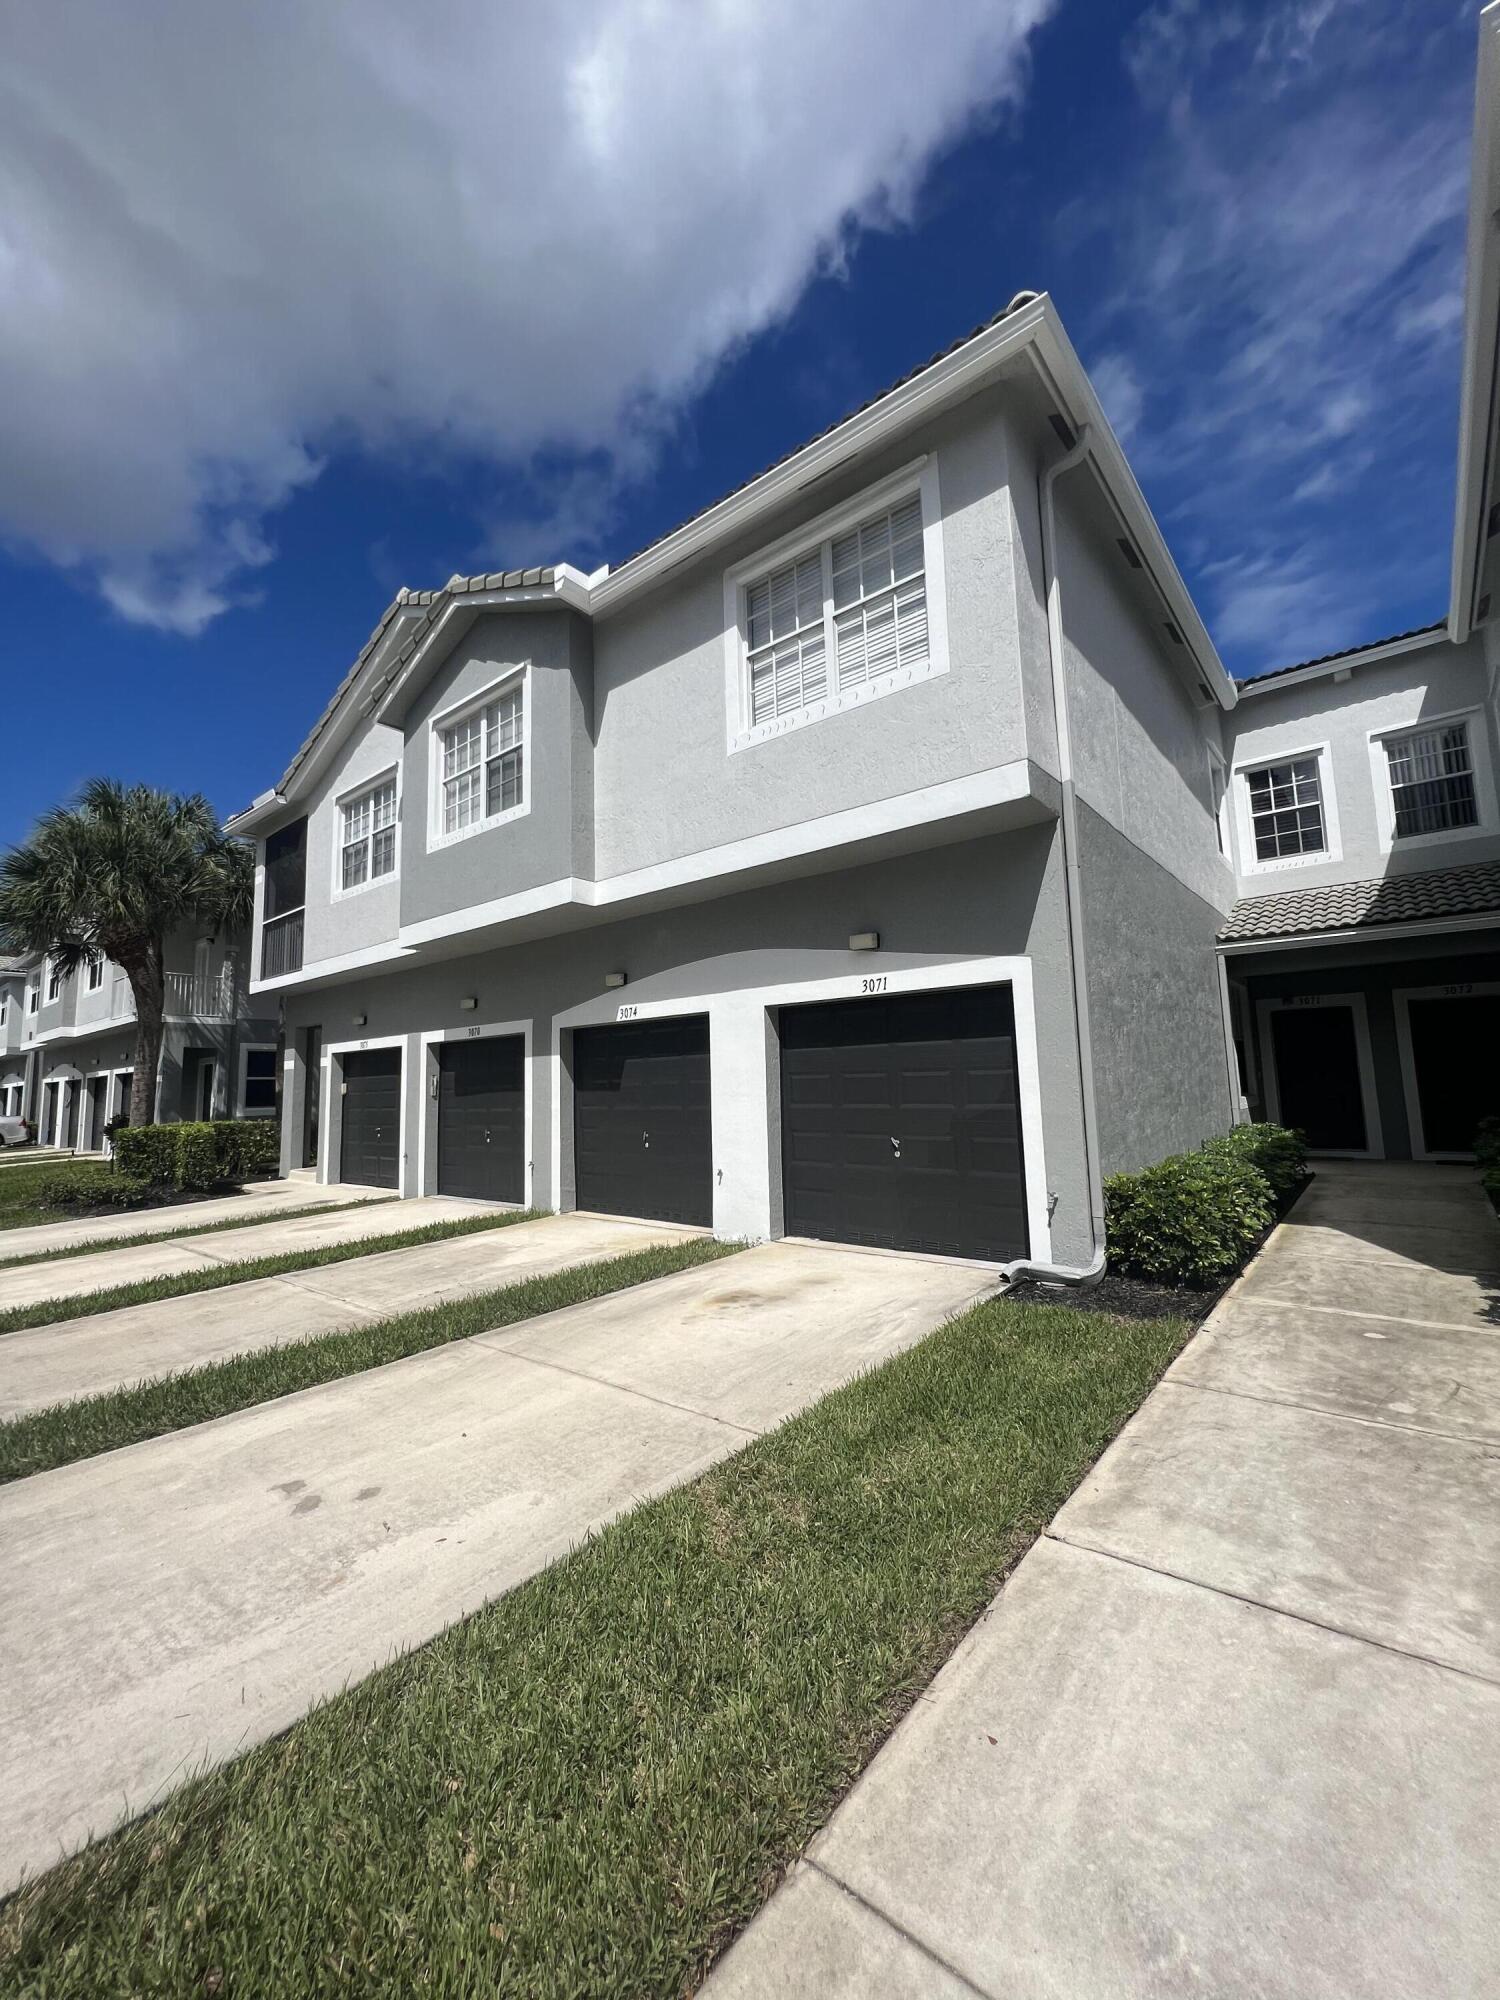 VERY NICE TOWNHOUSE IN GATED COMMUNITY. LOCATED IN THE HEART OF GREENACRES, UNIT COMES WITH MANY UPGRADES.  WATER AND ALARM MONITORING IS INCLUDED. unit is currently tenant occupied.